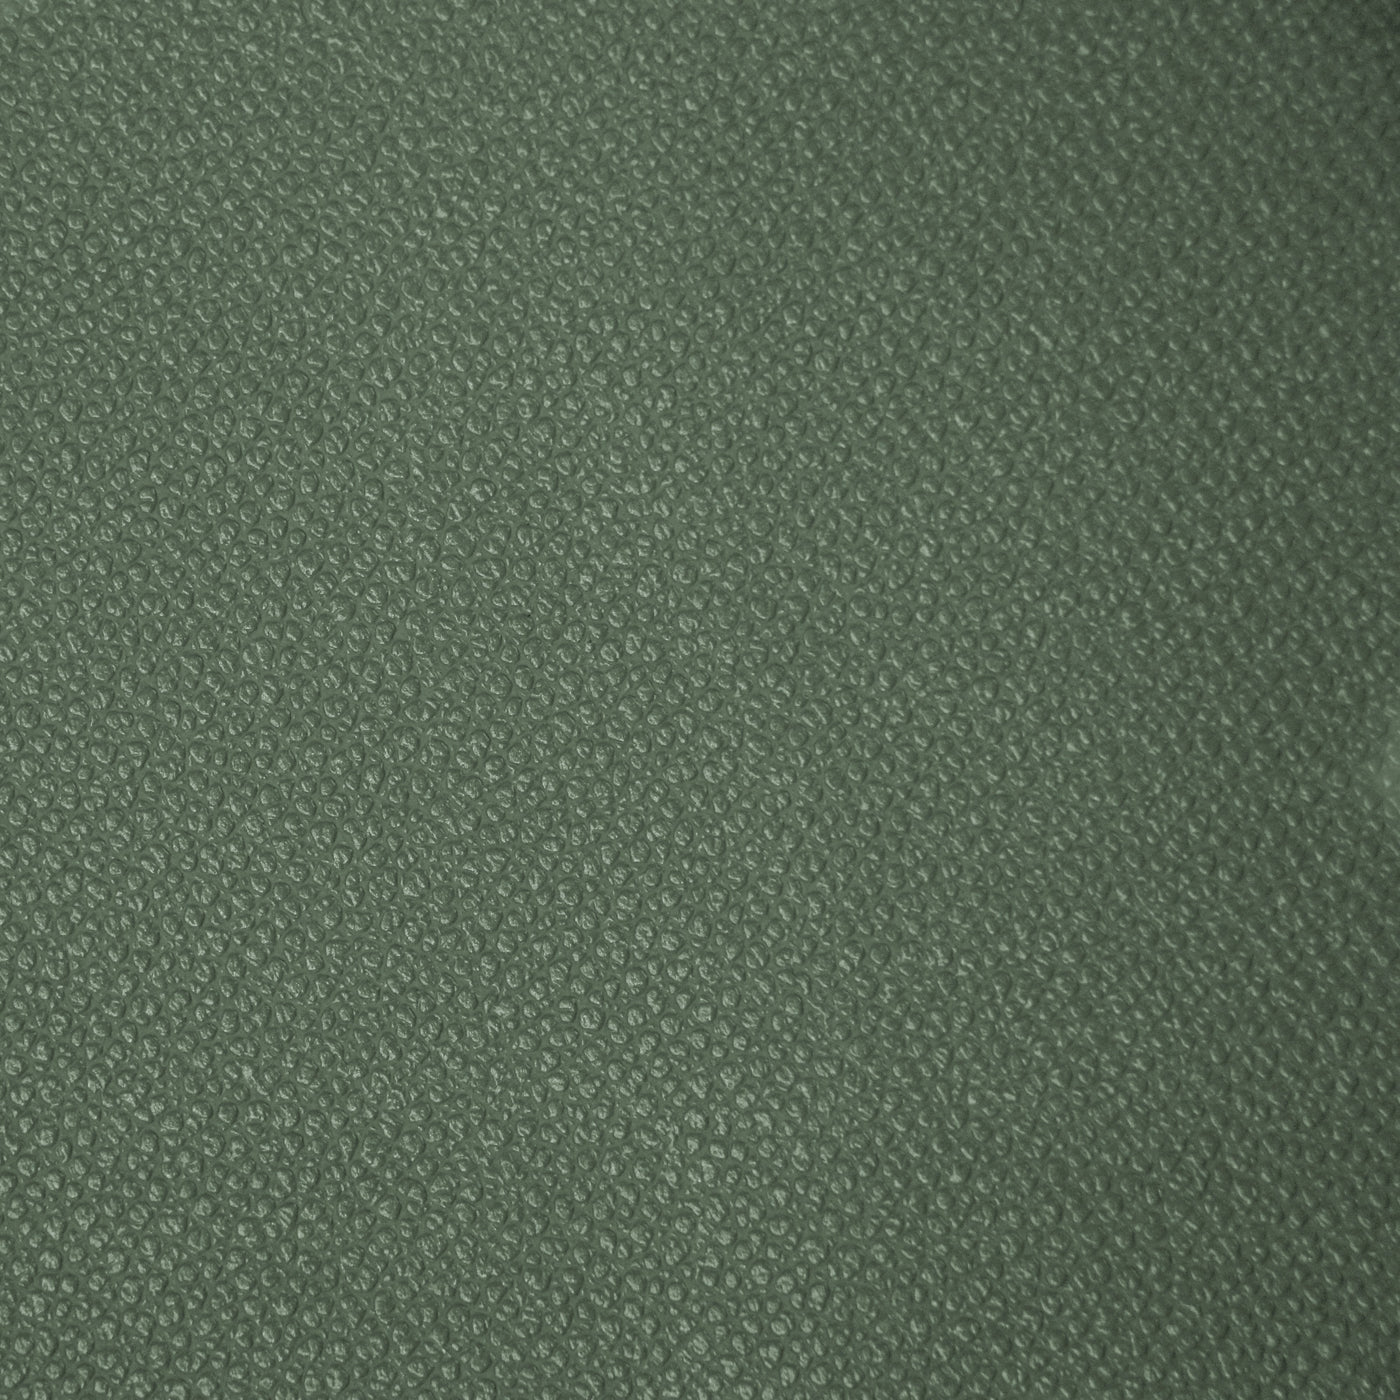 Packaged 1/2 Yard Cut: Forest Green Pebble Faux Leather